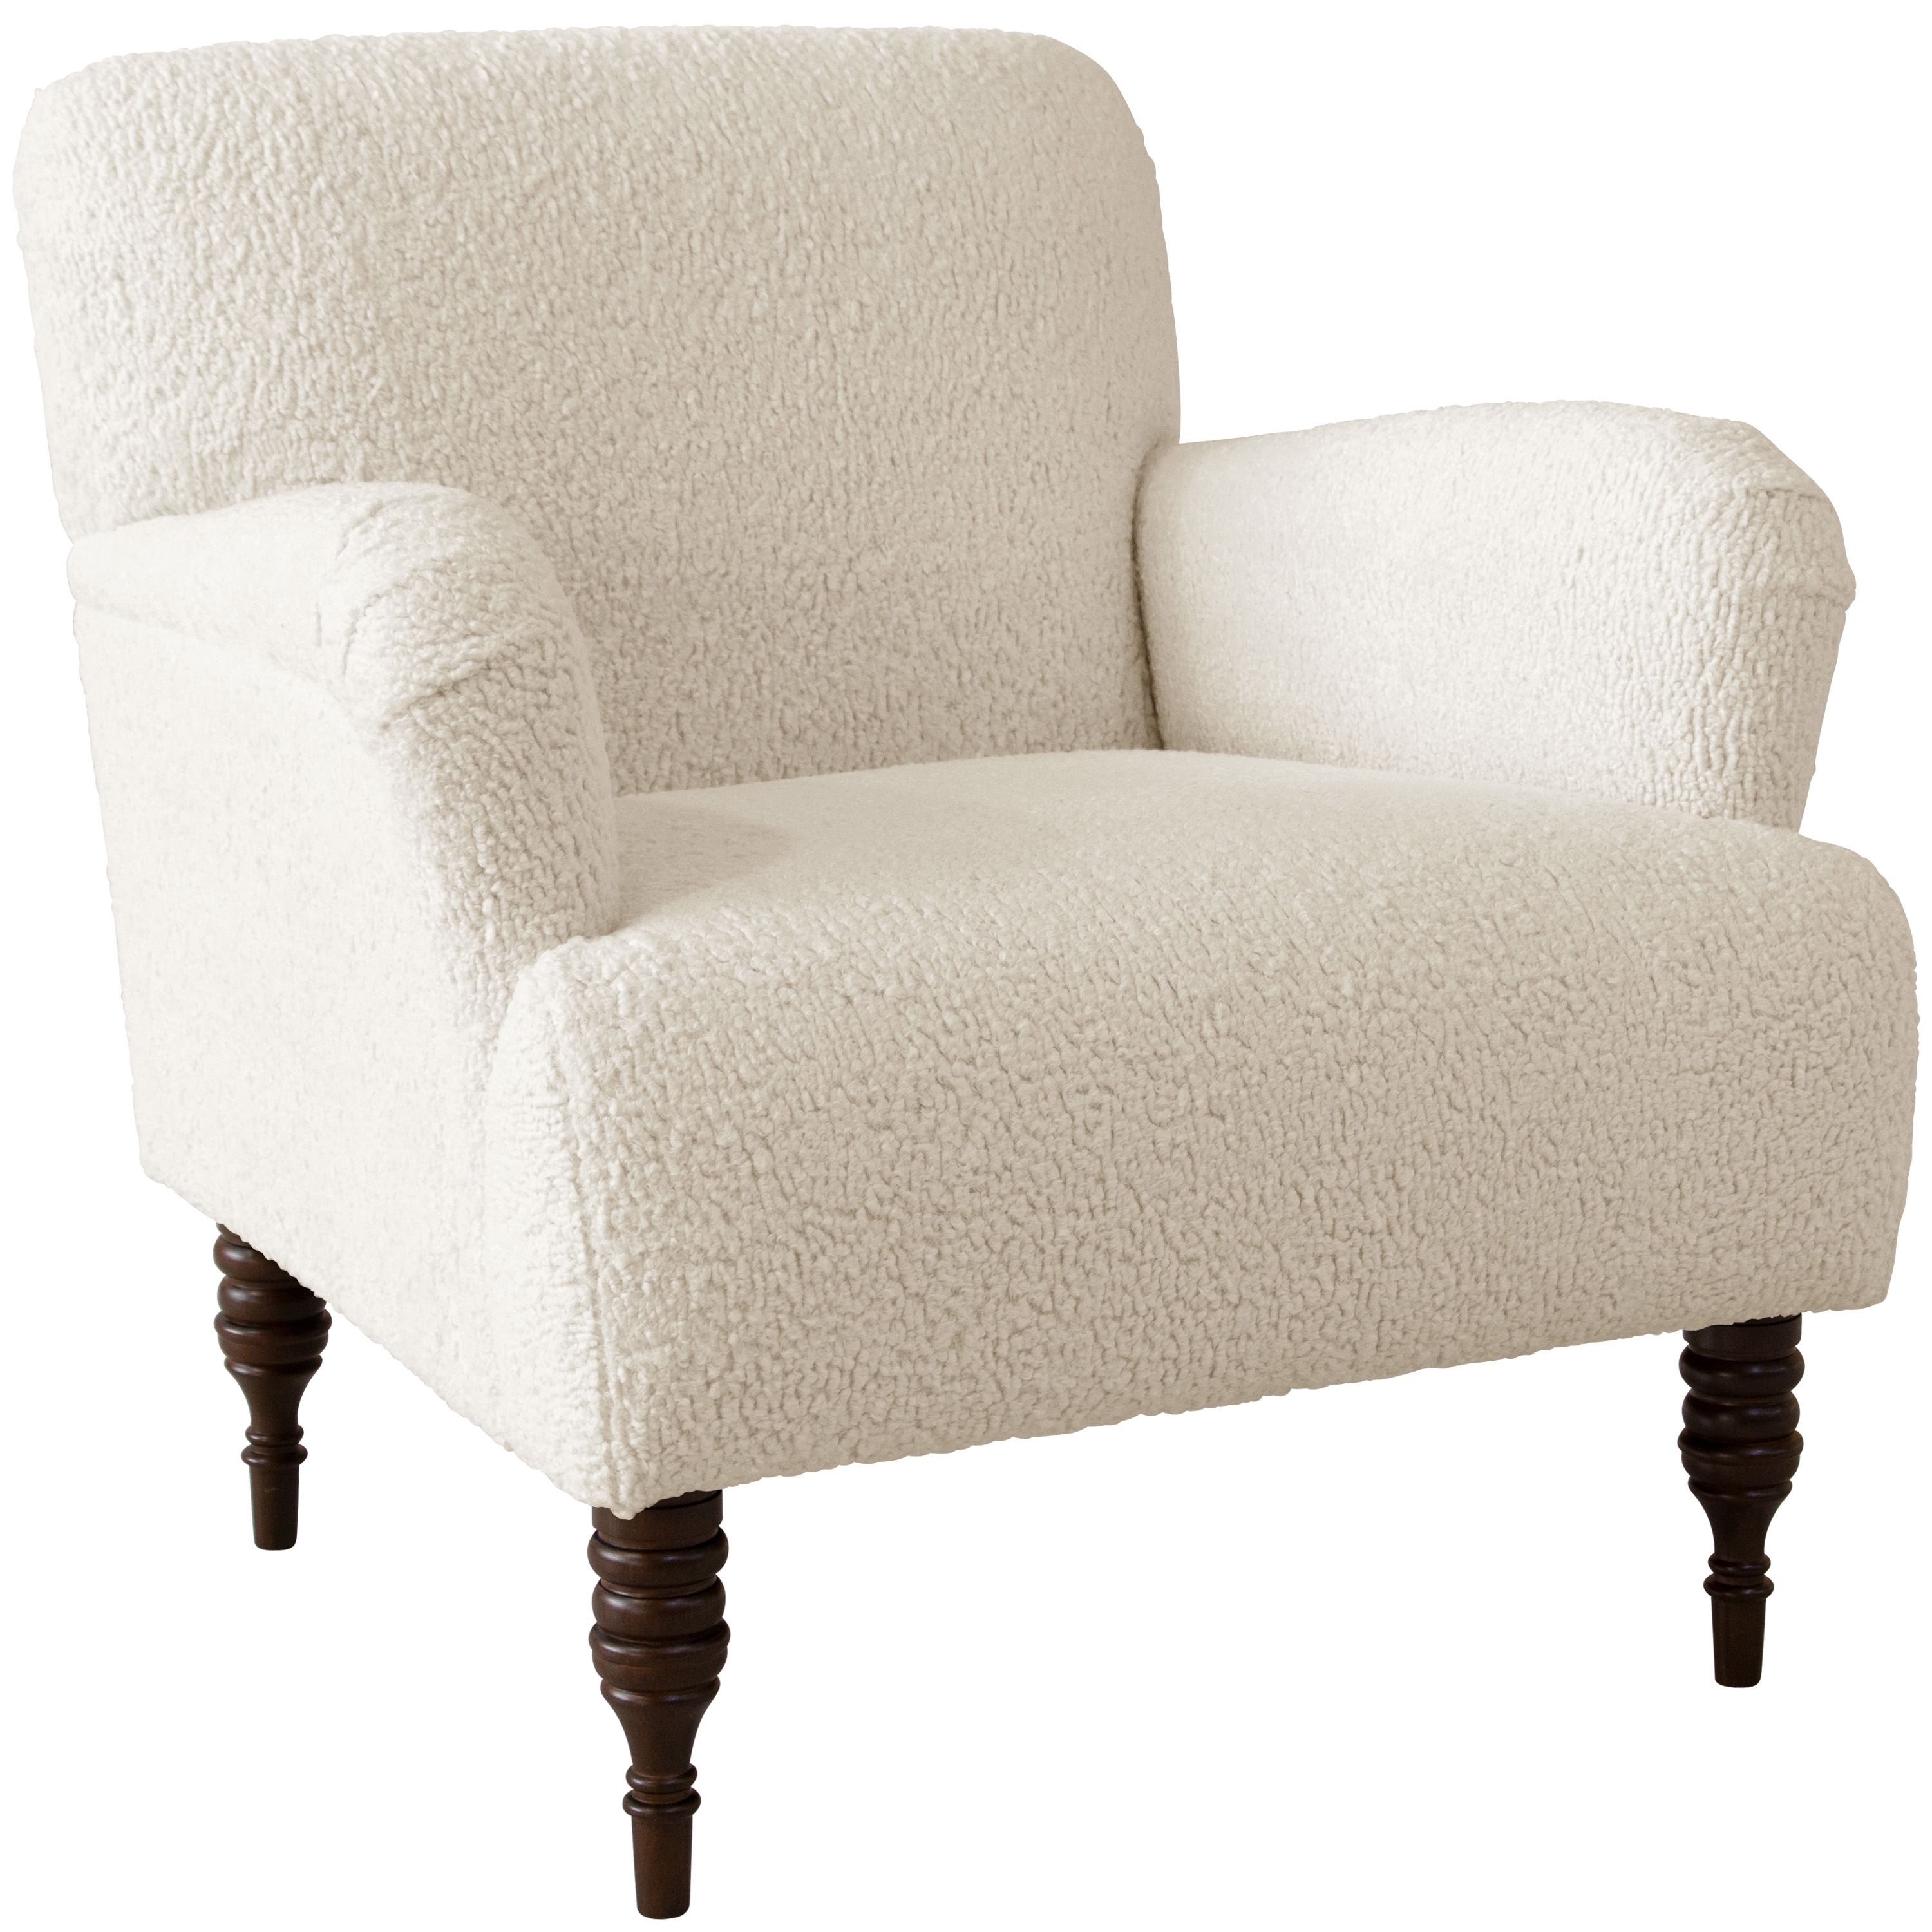 Norwood Chair in Sheepskin Natural - Image 0